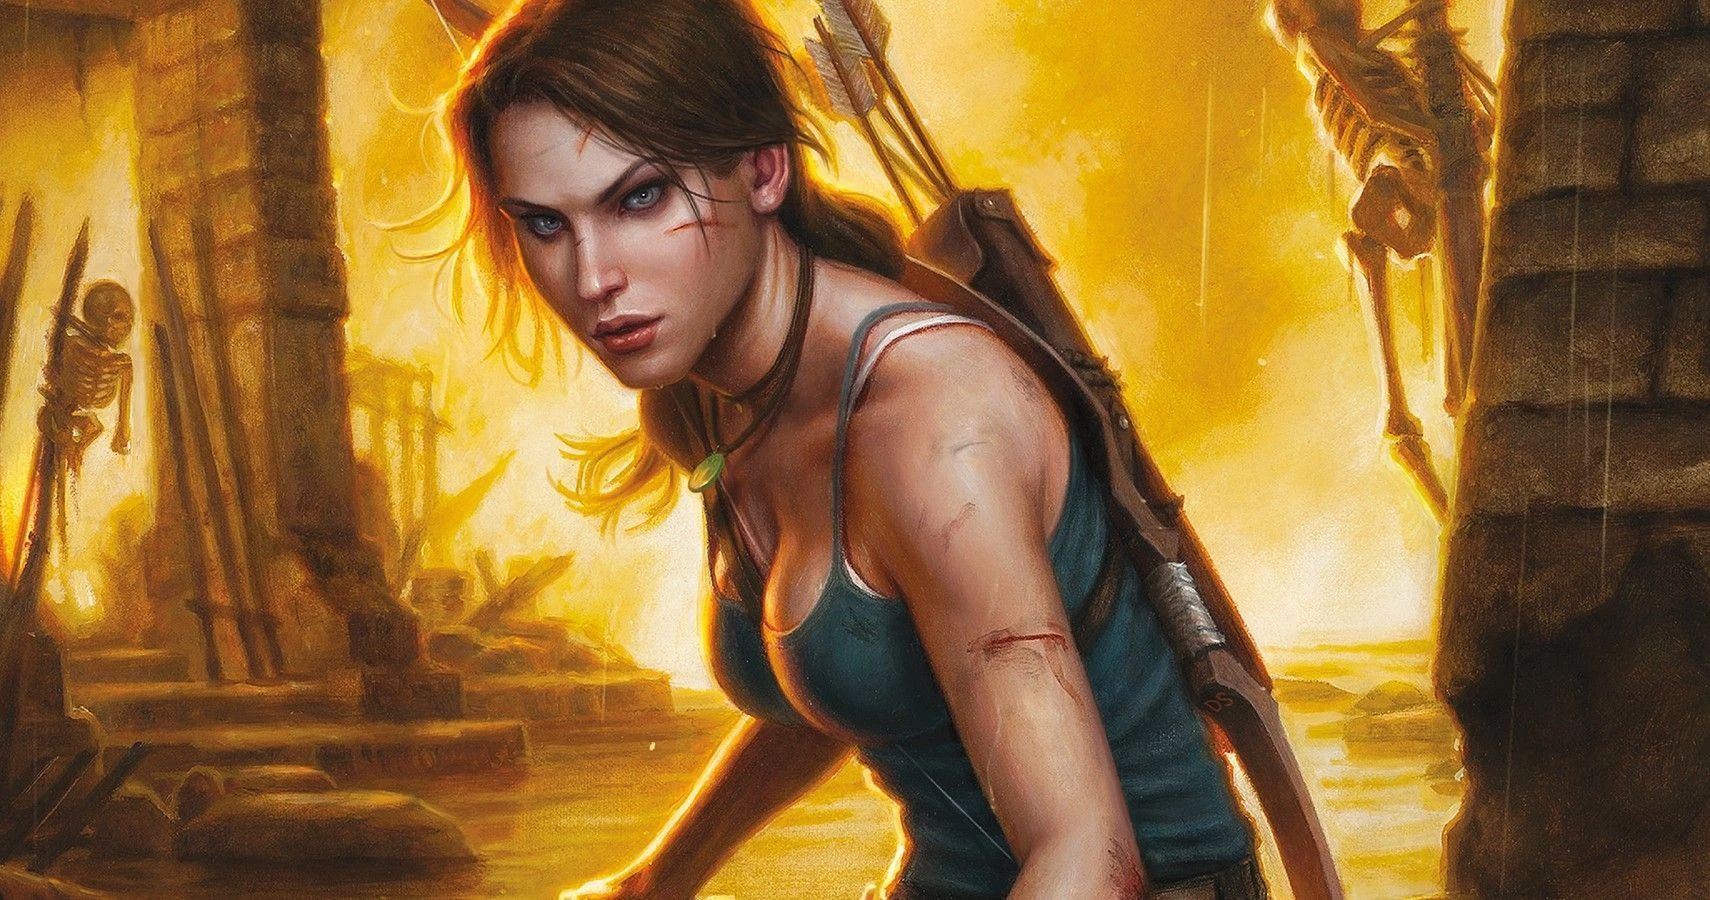 Things about Tomb Raider that only a fan knows